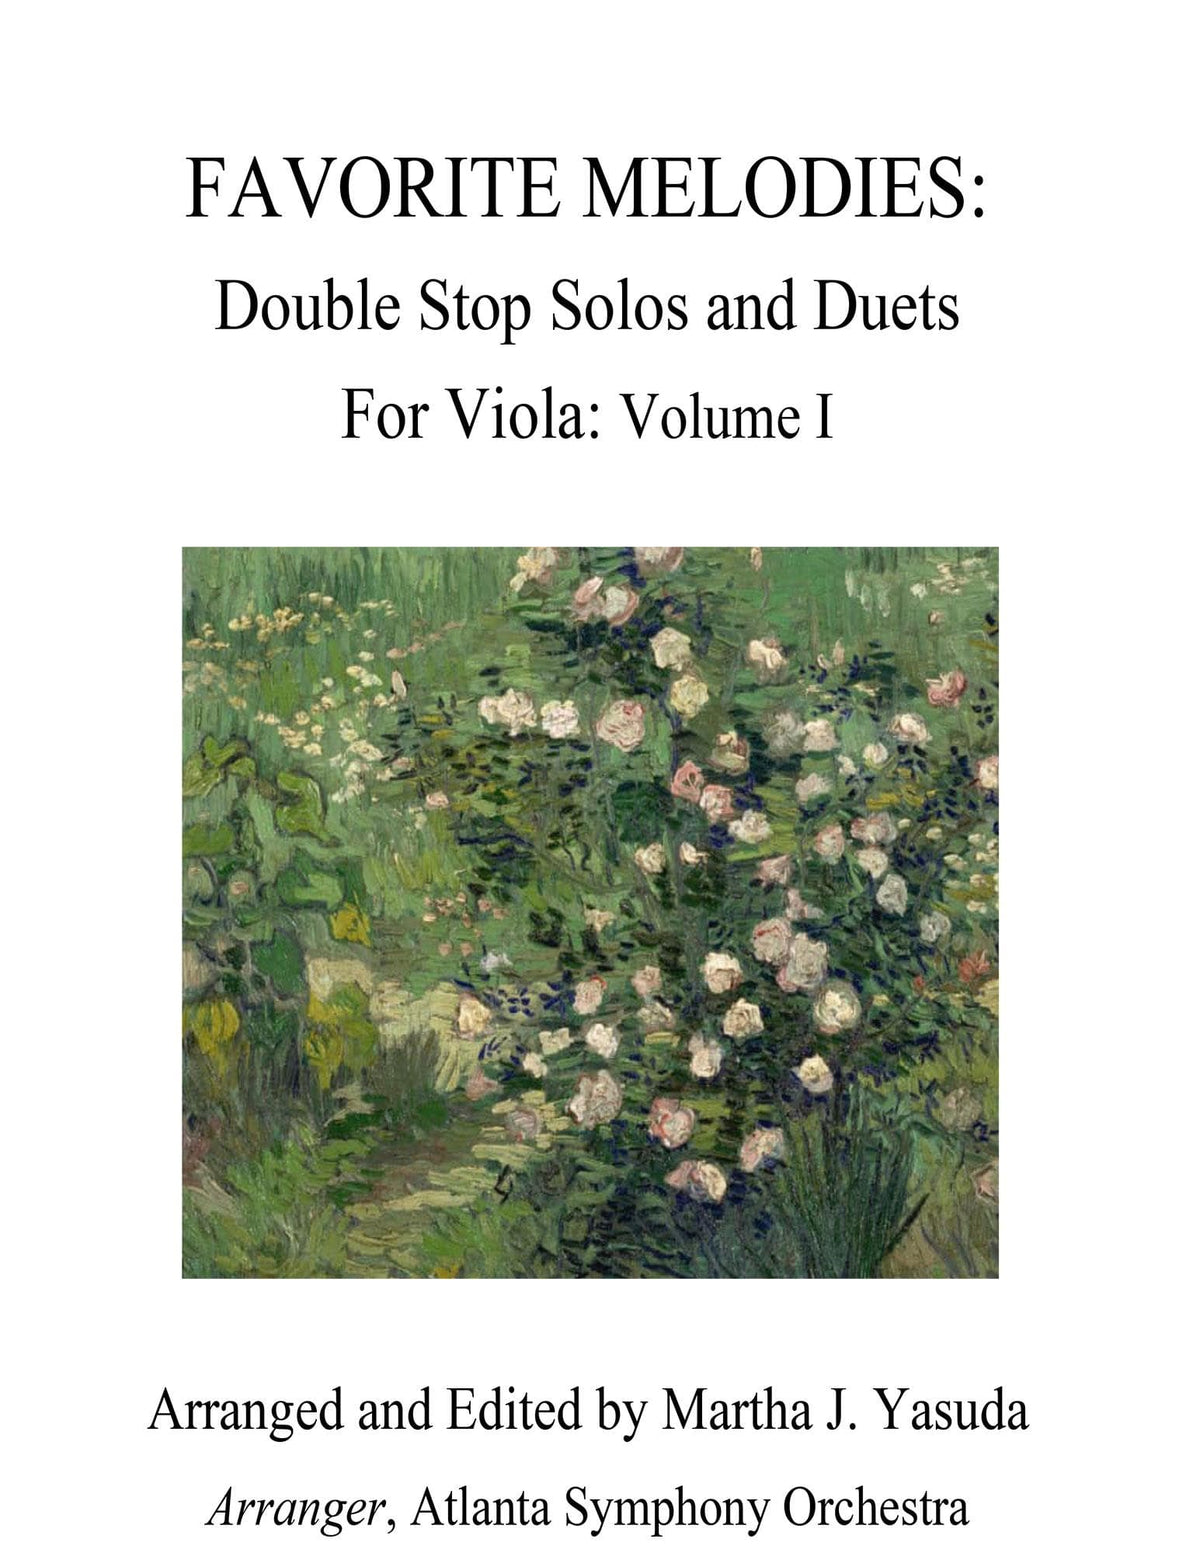 Yasuda, Martha - Favorite Melodies: Double Stop Solos and Duets for Viola, Volume I - Digital Download